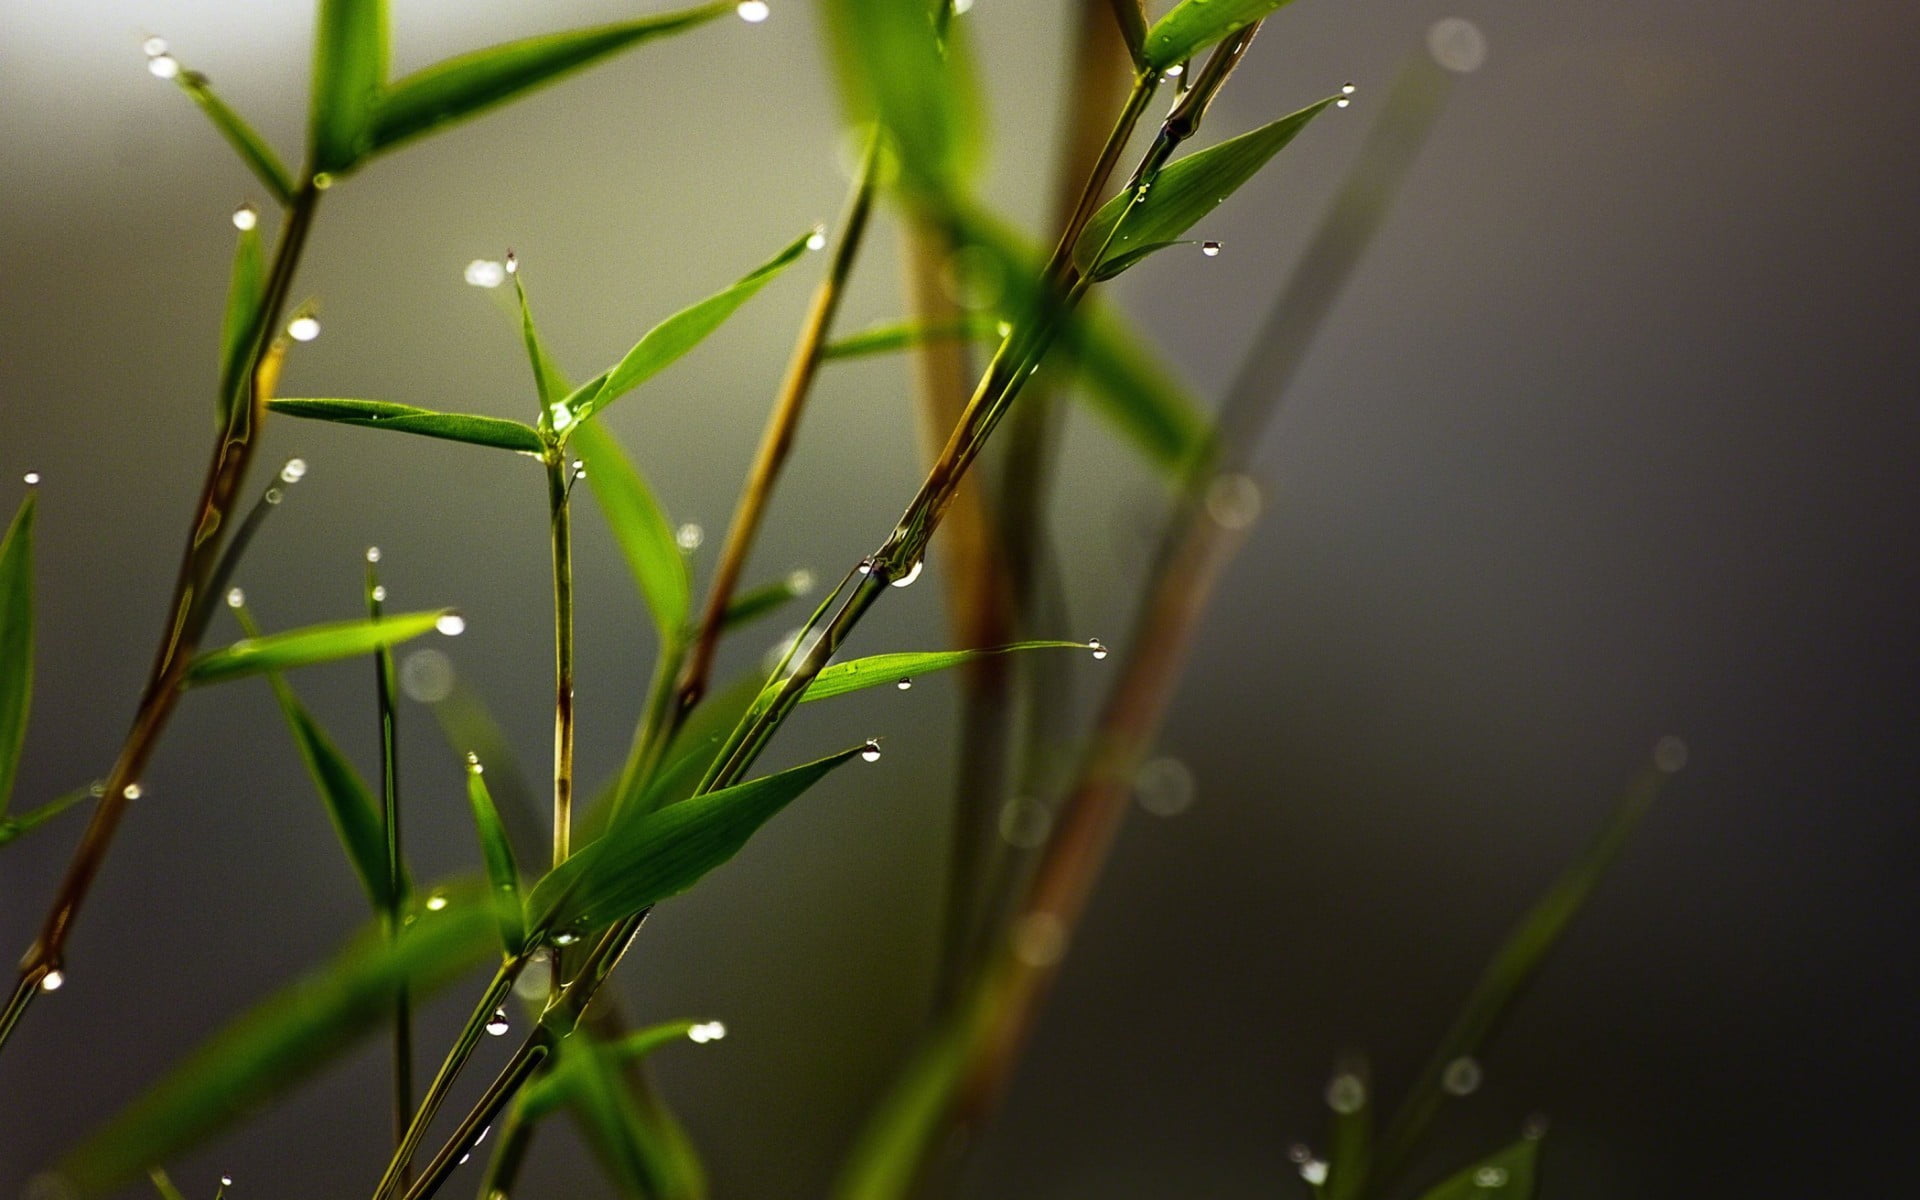 microphotography of green grass and water dew, green leafed plant